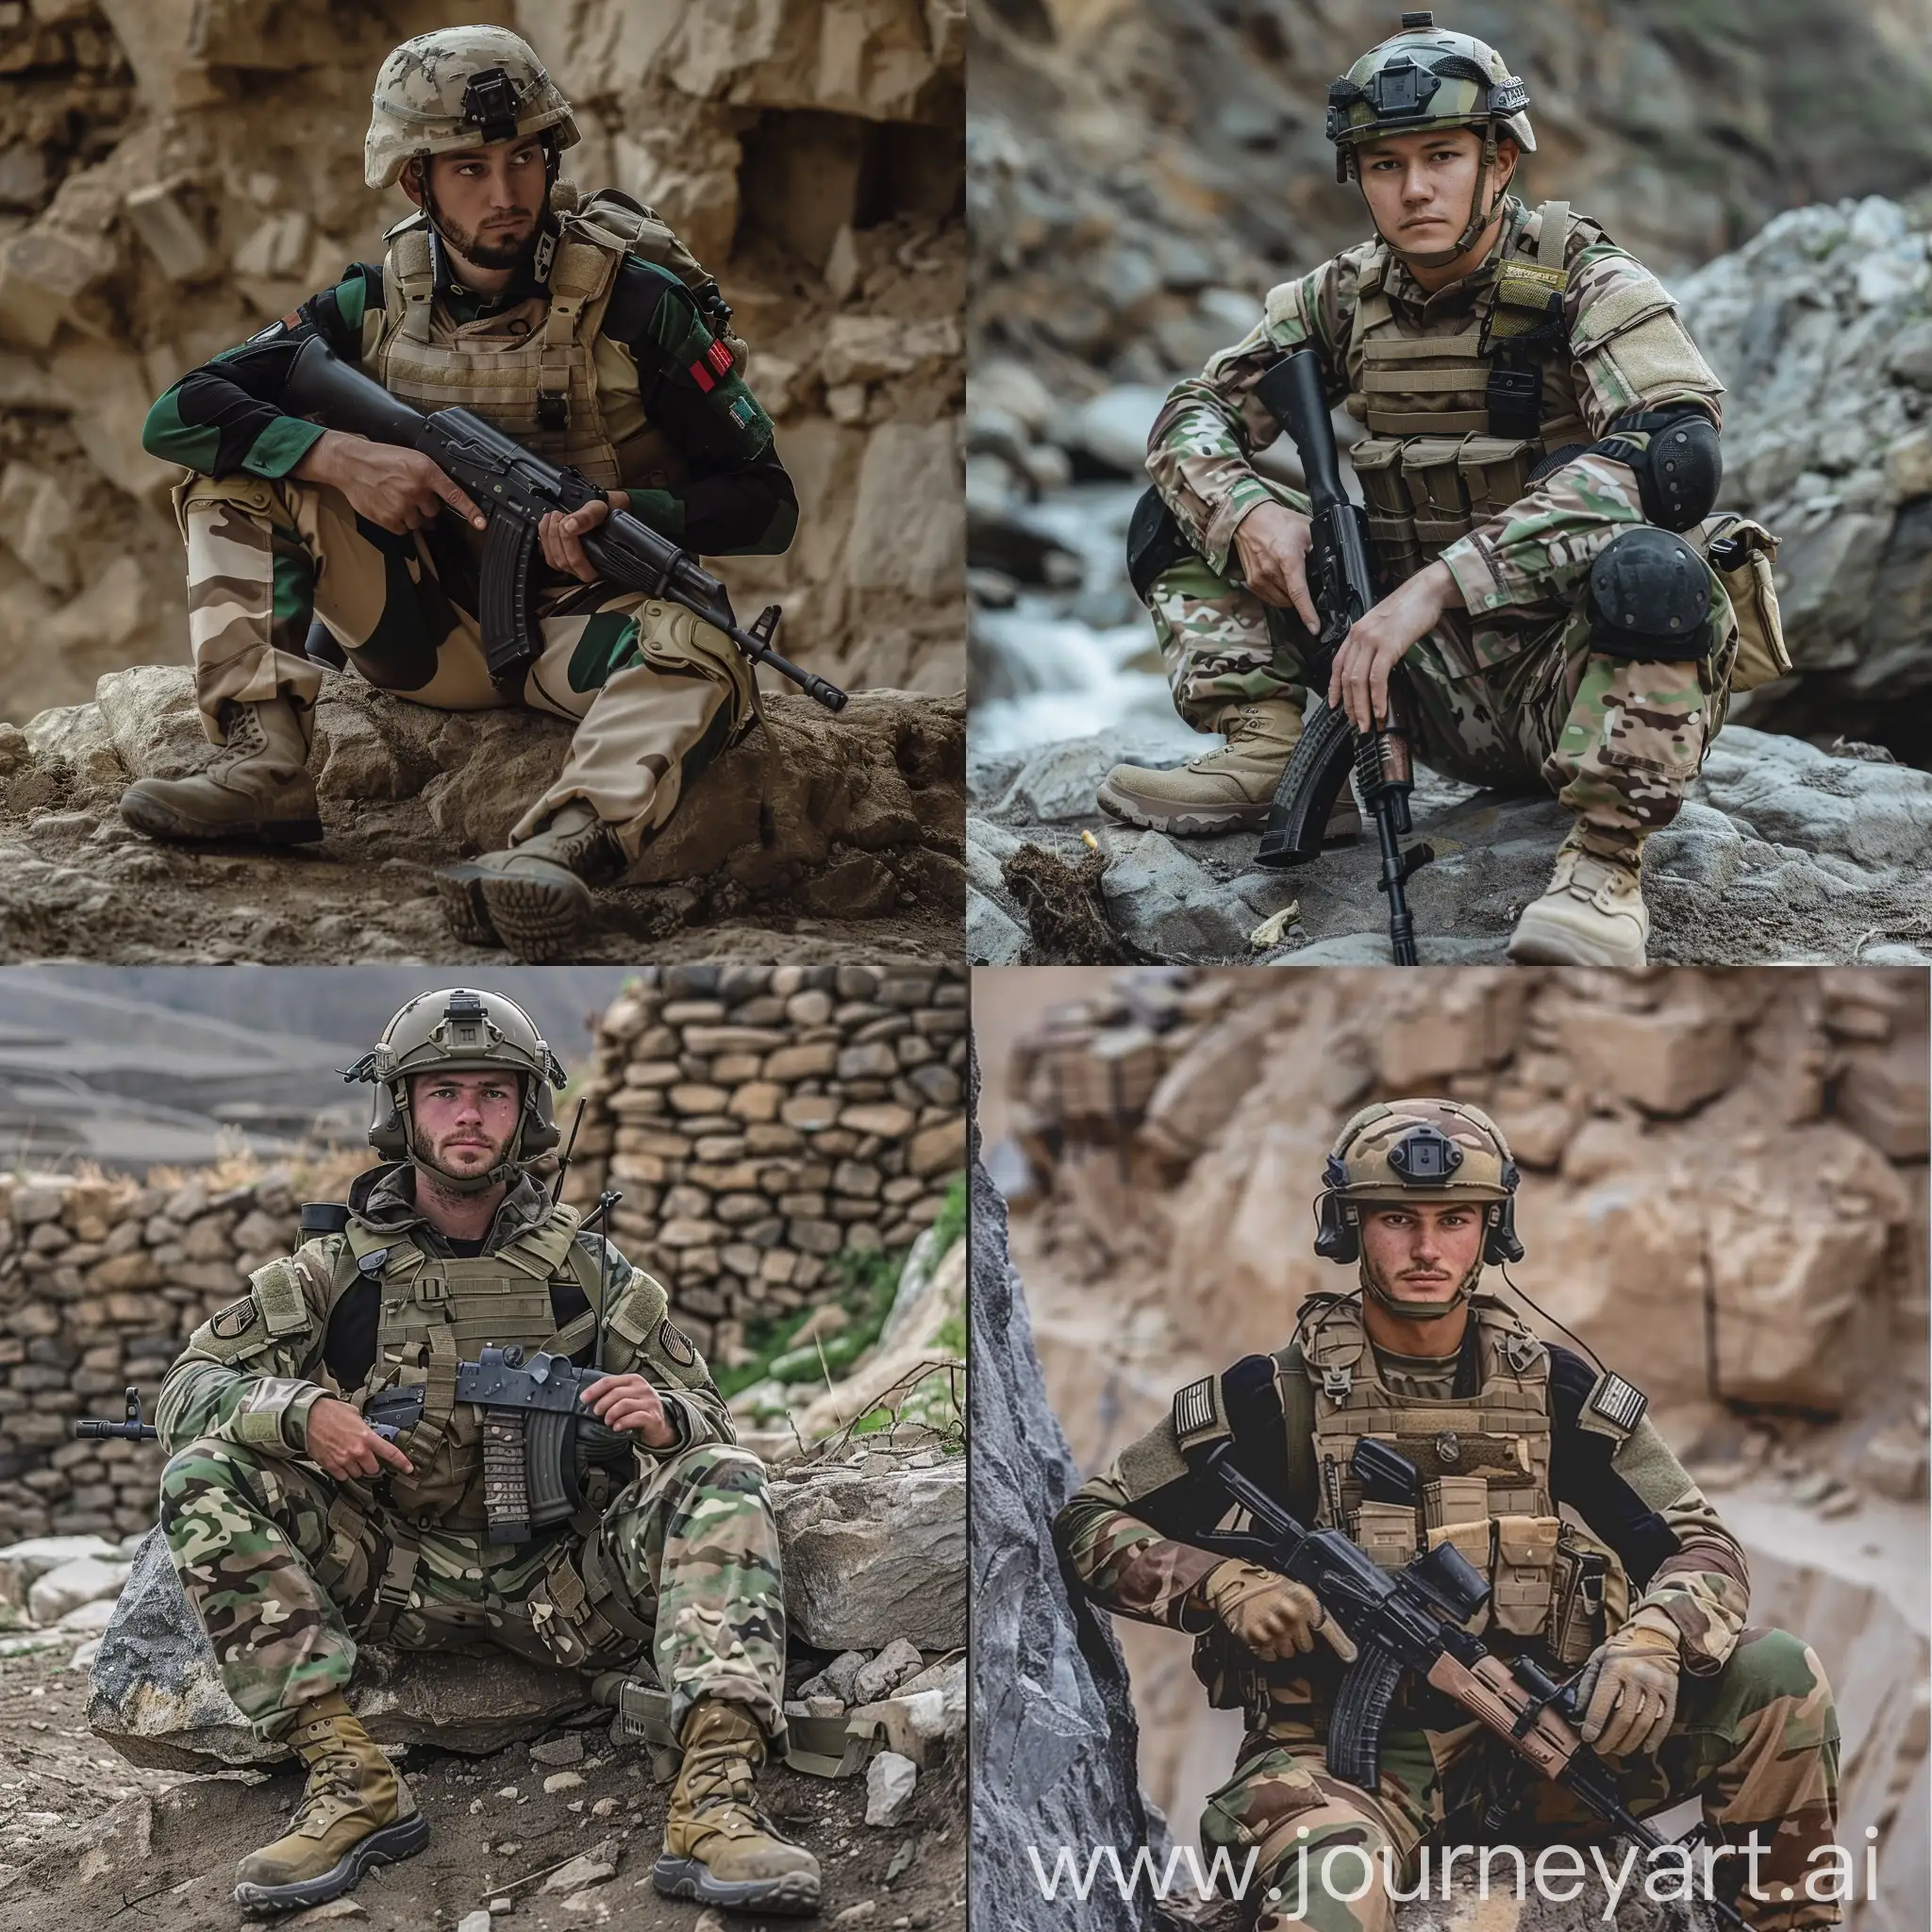 Military-Soldier-in-Camouflage-Uniform-with-AK45-Rifle-Sitting-on-Rock